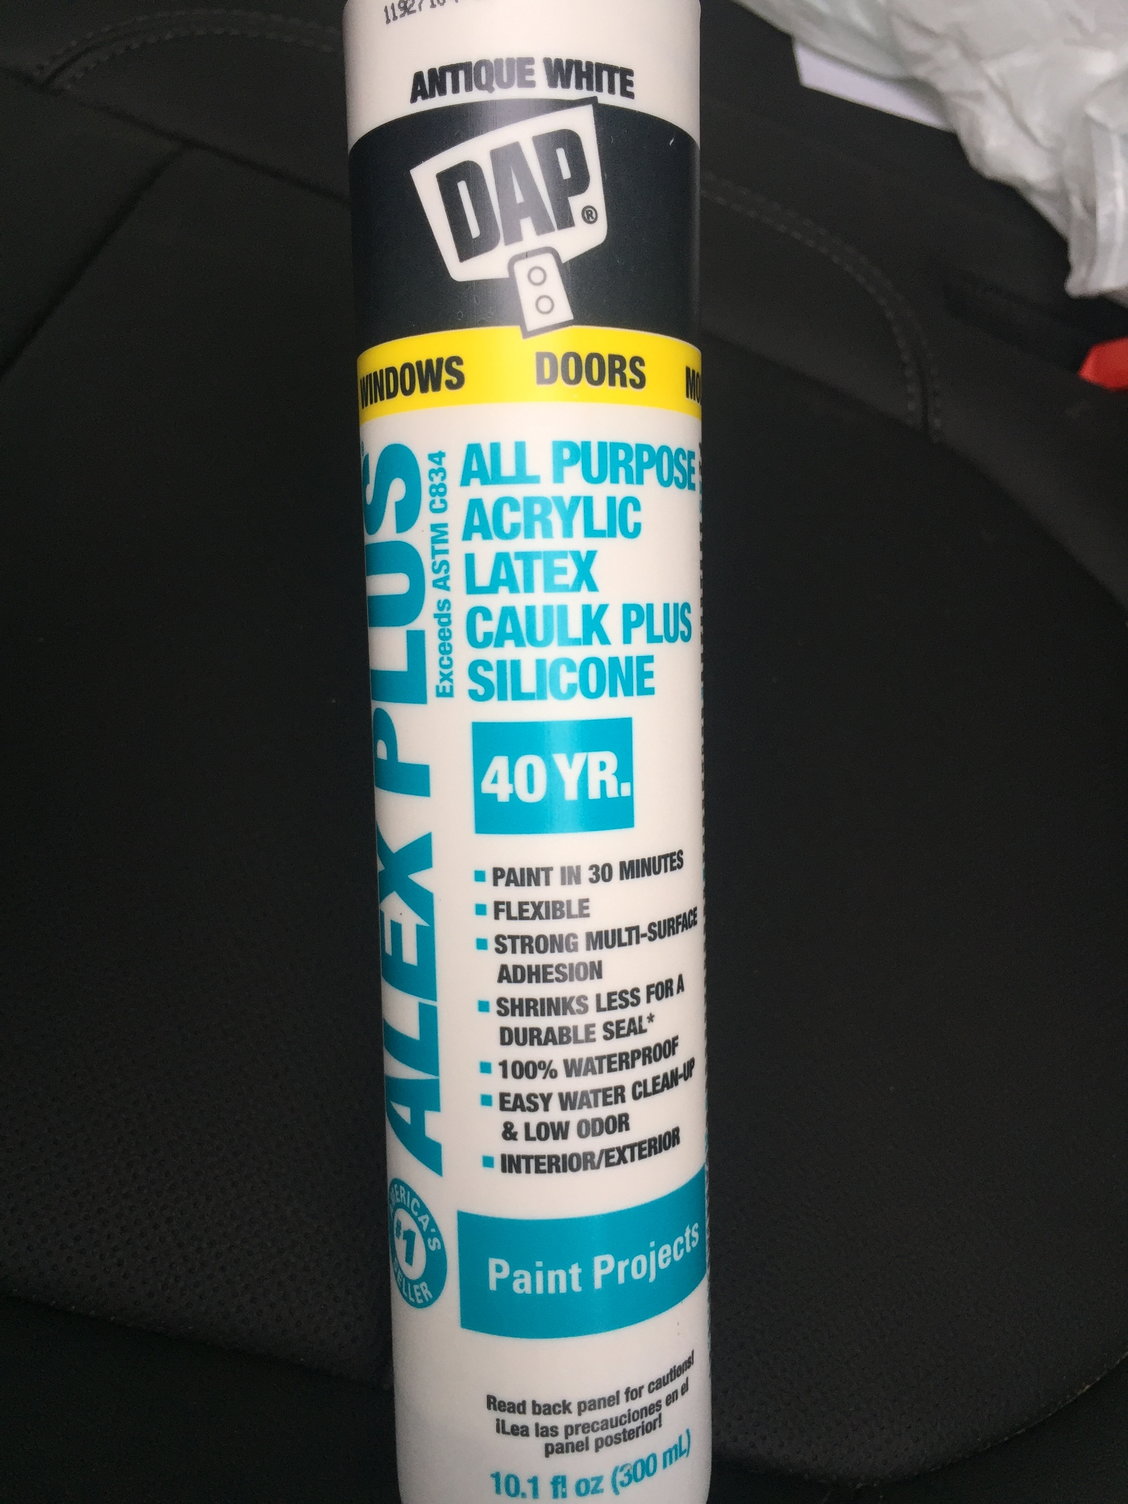 Is acrylic latex caulk ok to use - The Hull Truth - Boating and